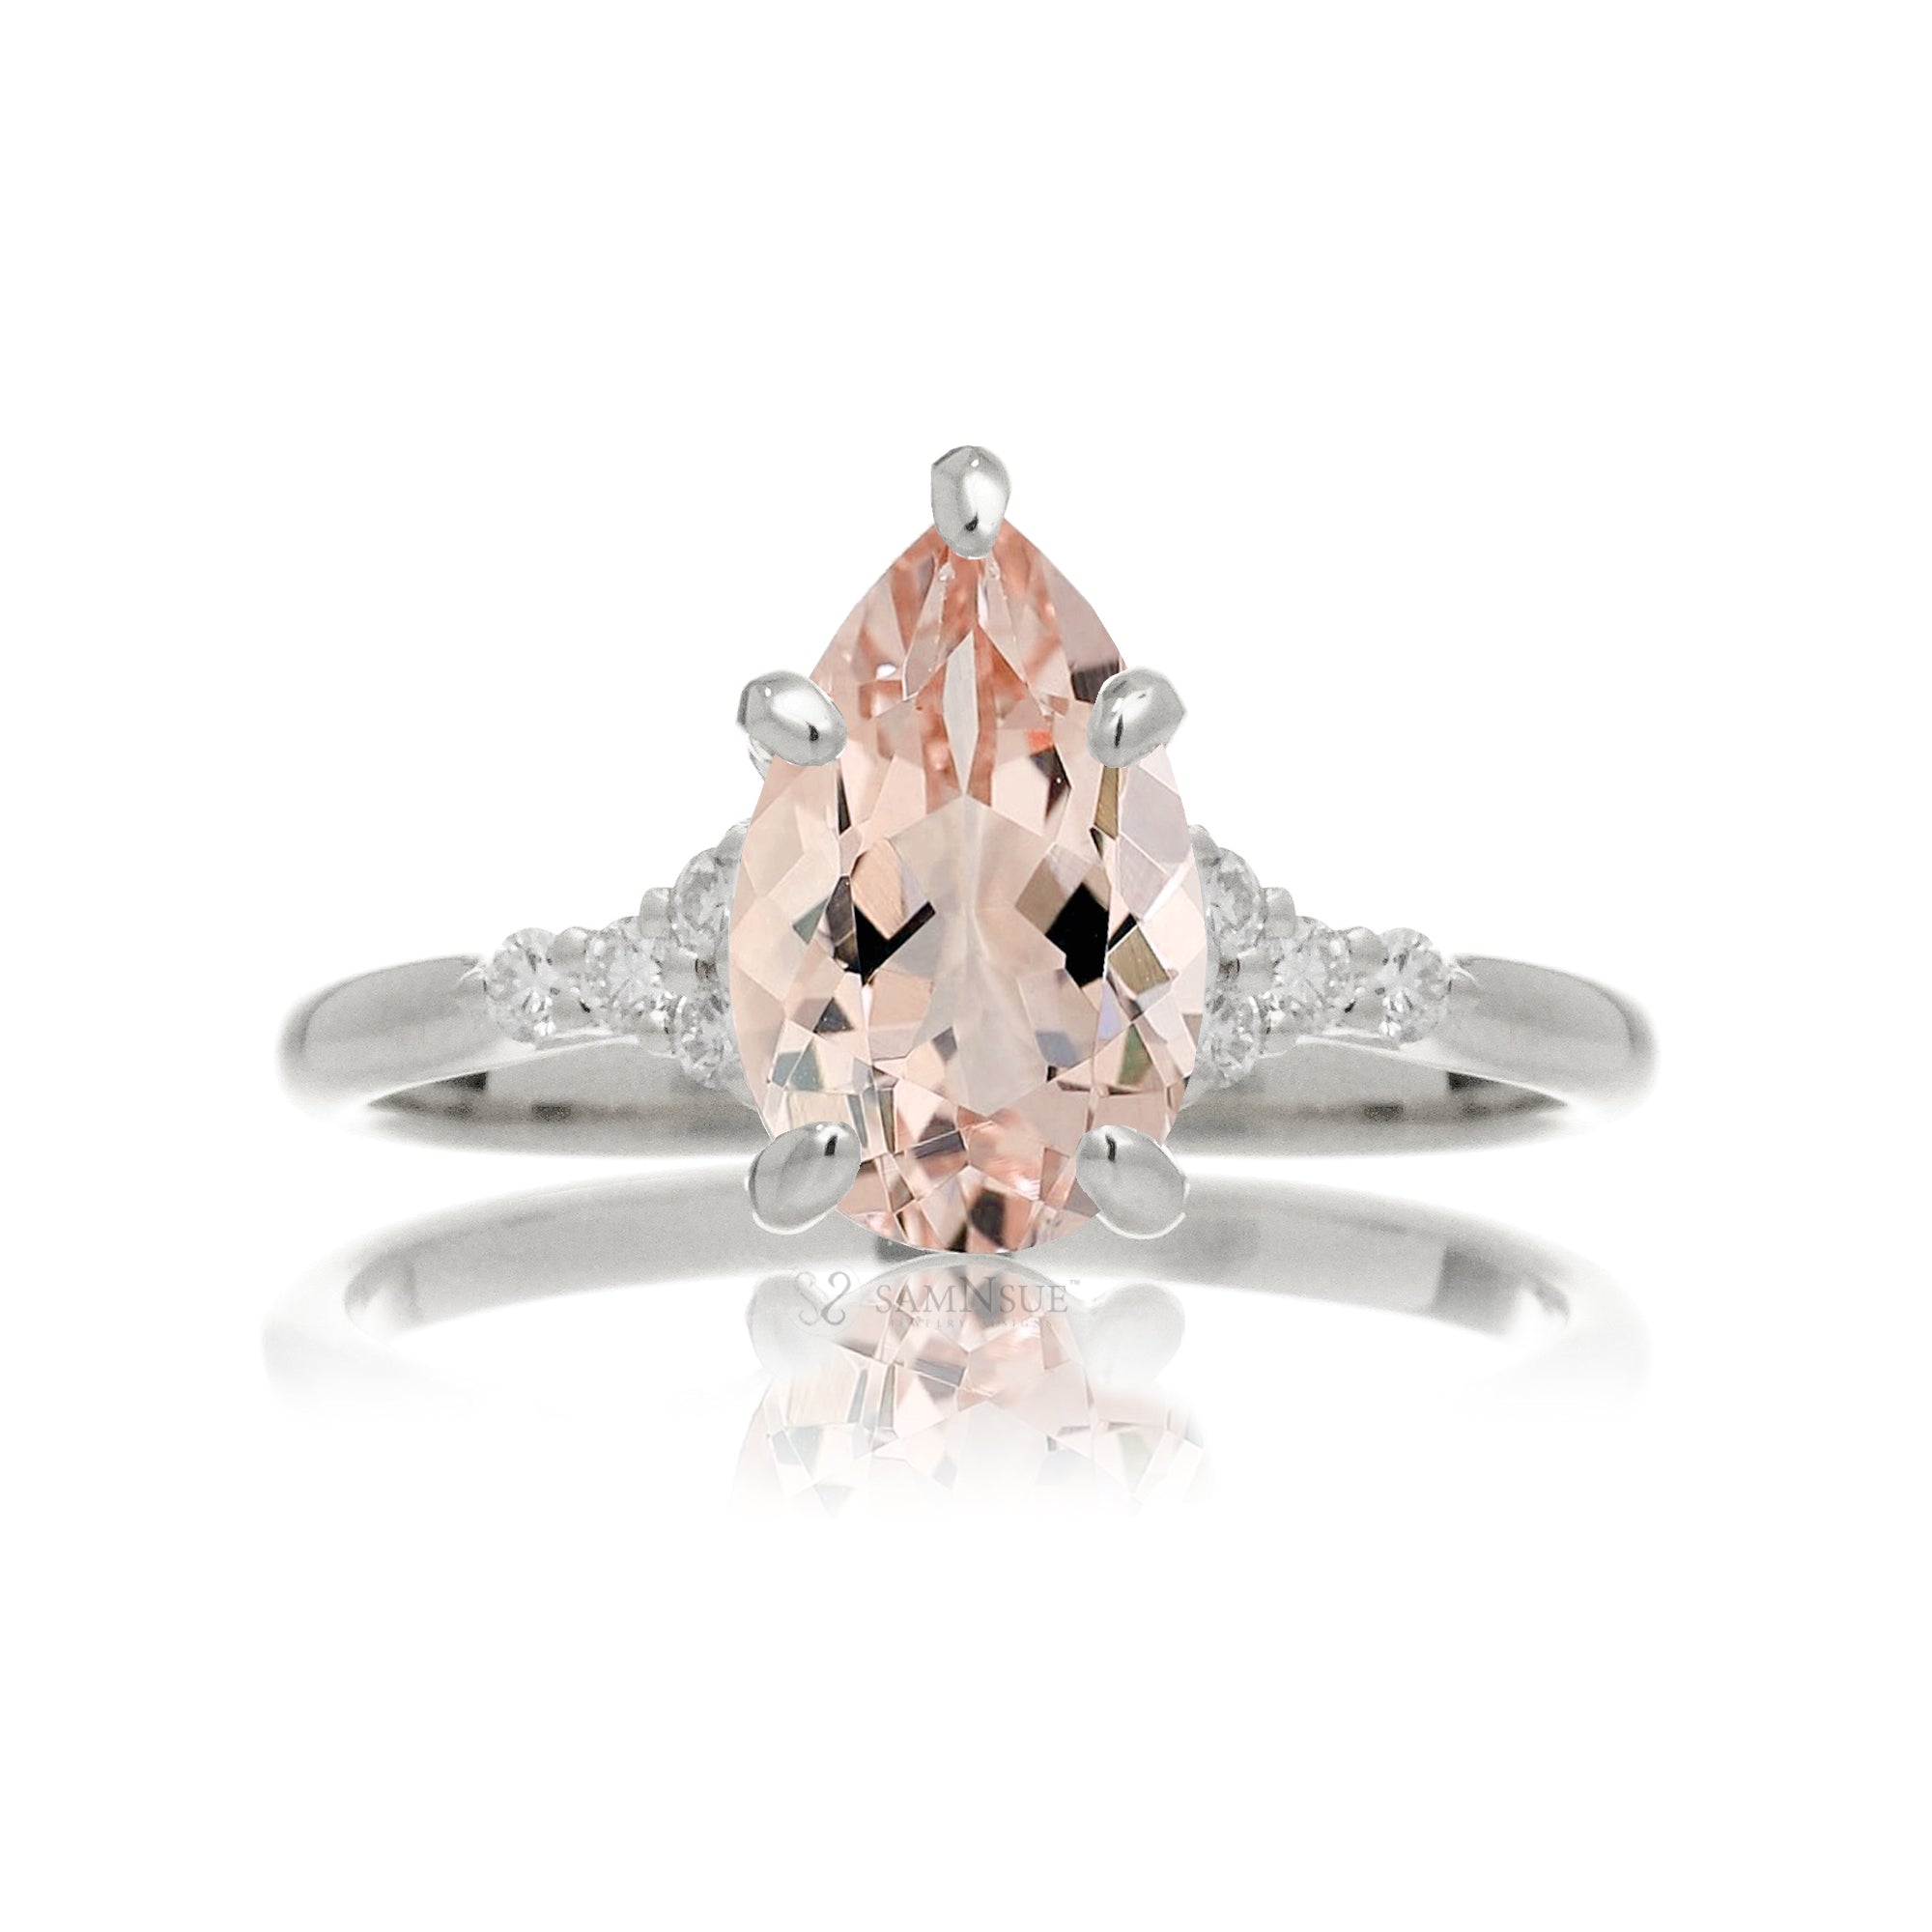 Pear cut natural morganite and diamond engagement ring in white gold - the Chloe